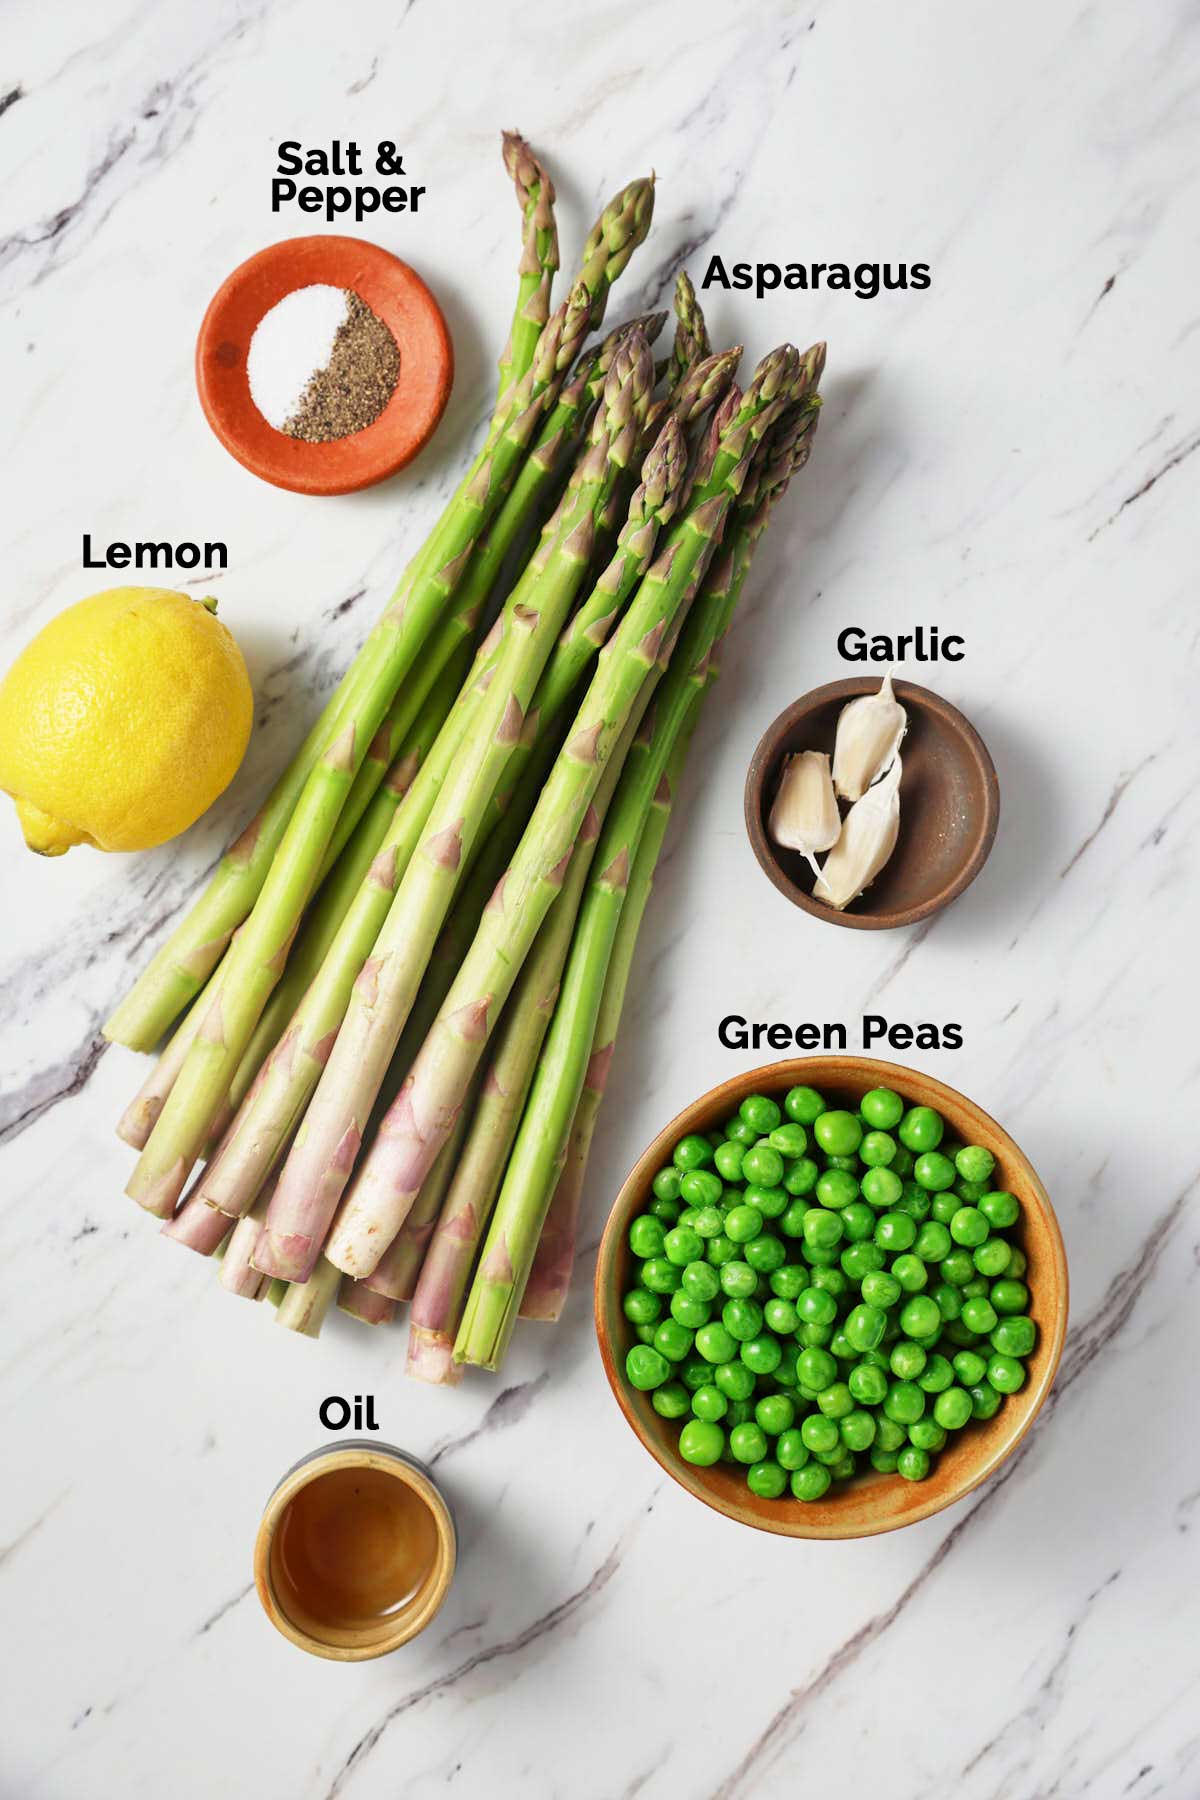 Ingredients for making sautéed asparagus and peas are placed on a flat surface.